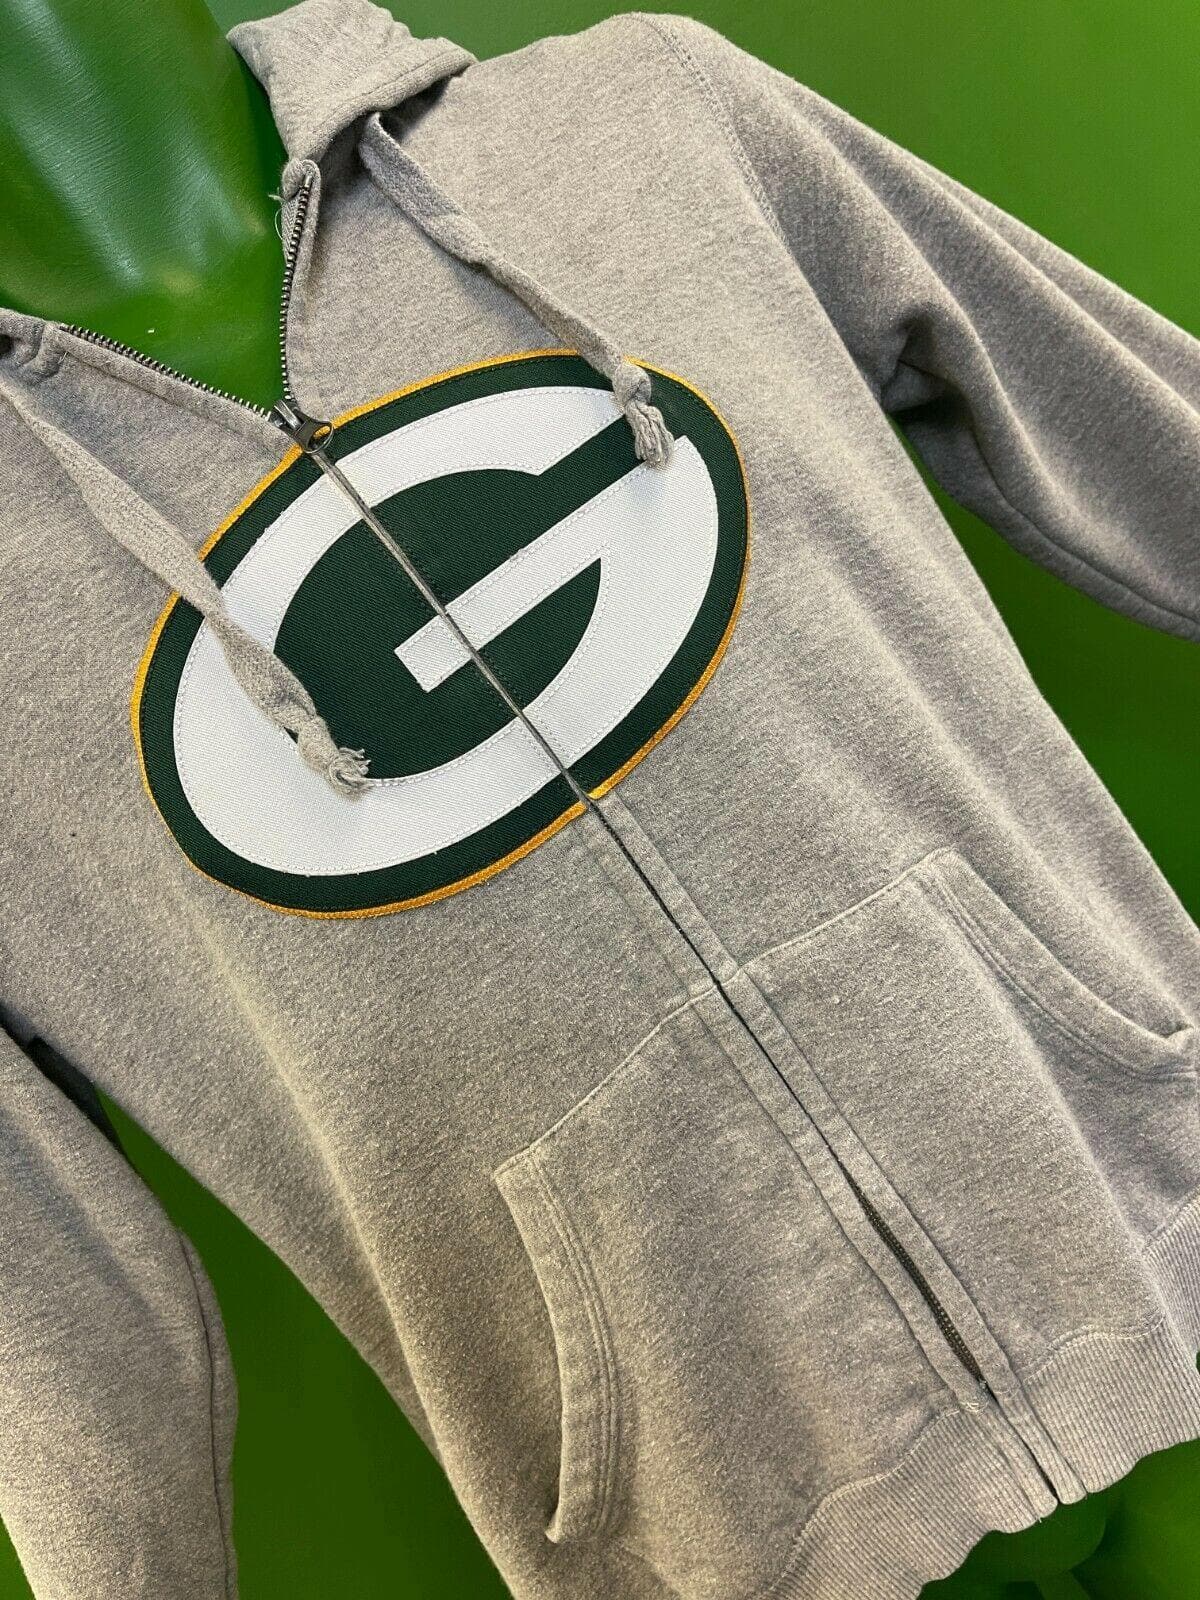 NFL Green Bay Packers Full Zip Grey Hoodie Pro Line Youth Large 14-16